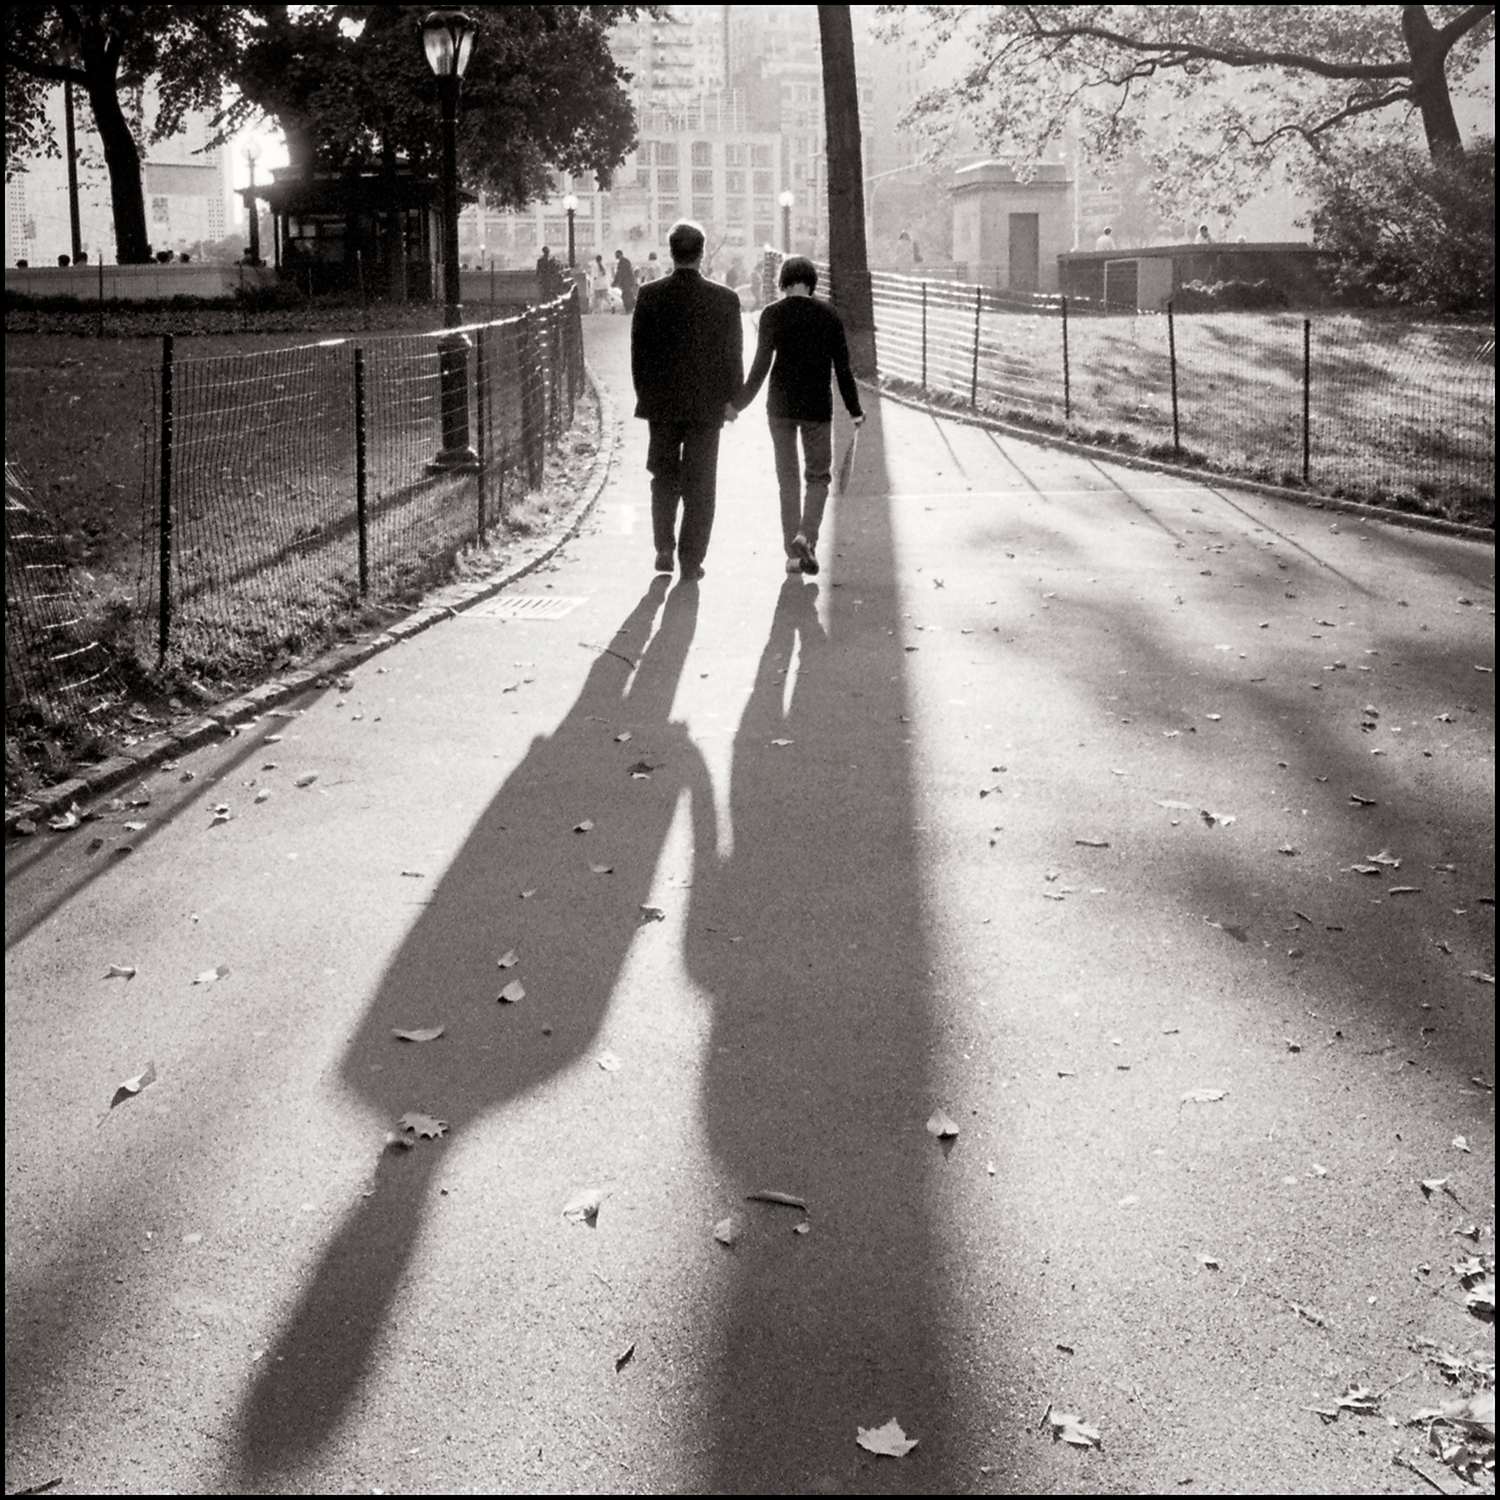 Afternoon Shadows, New York City, 1999